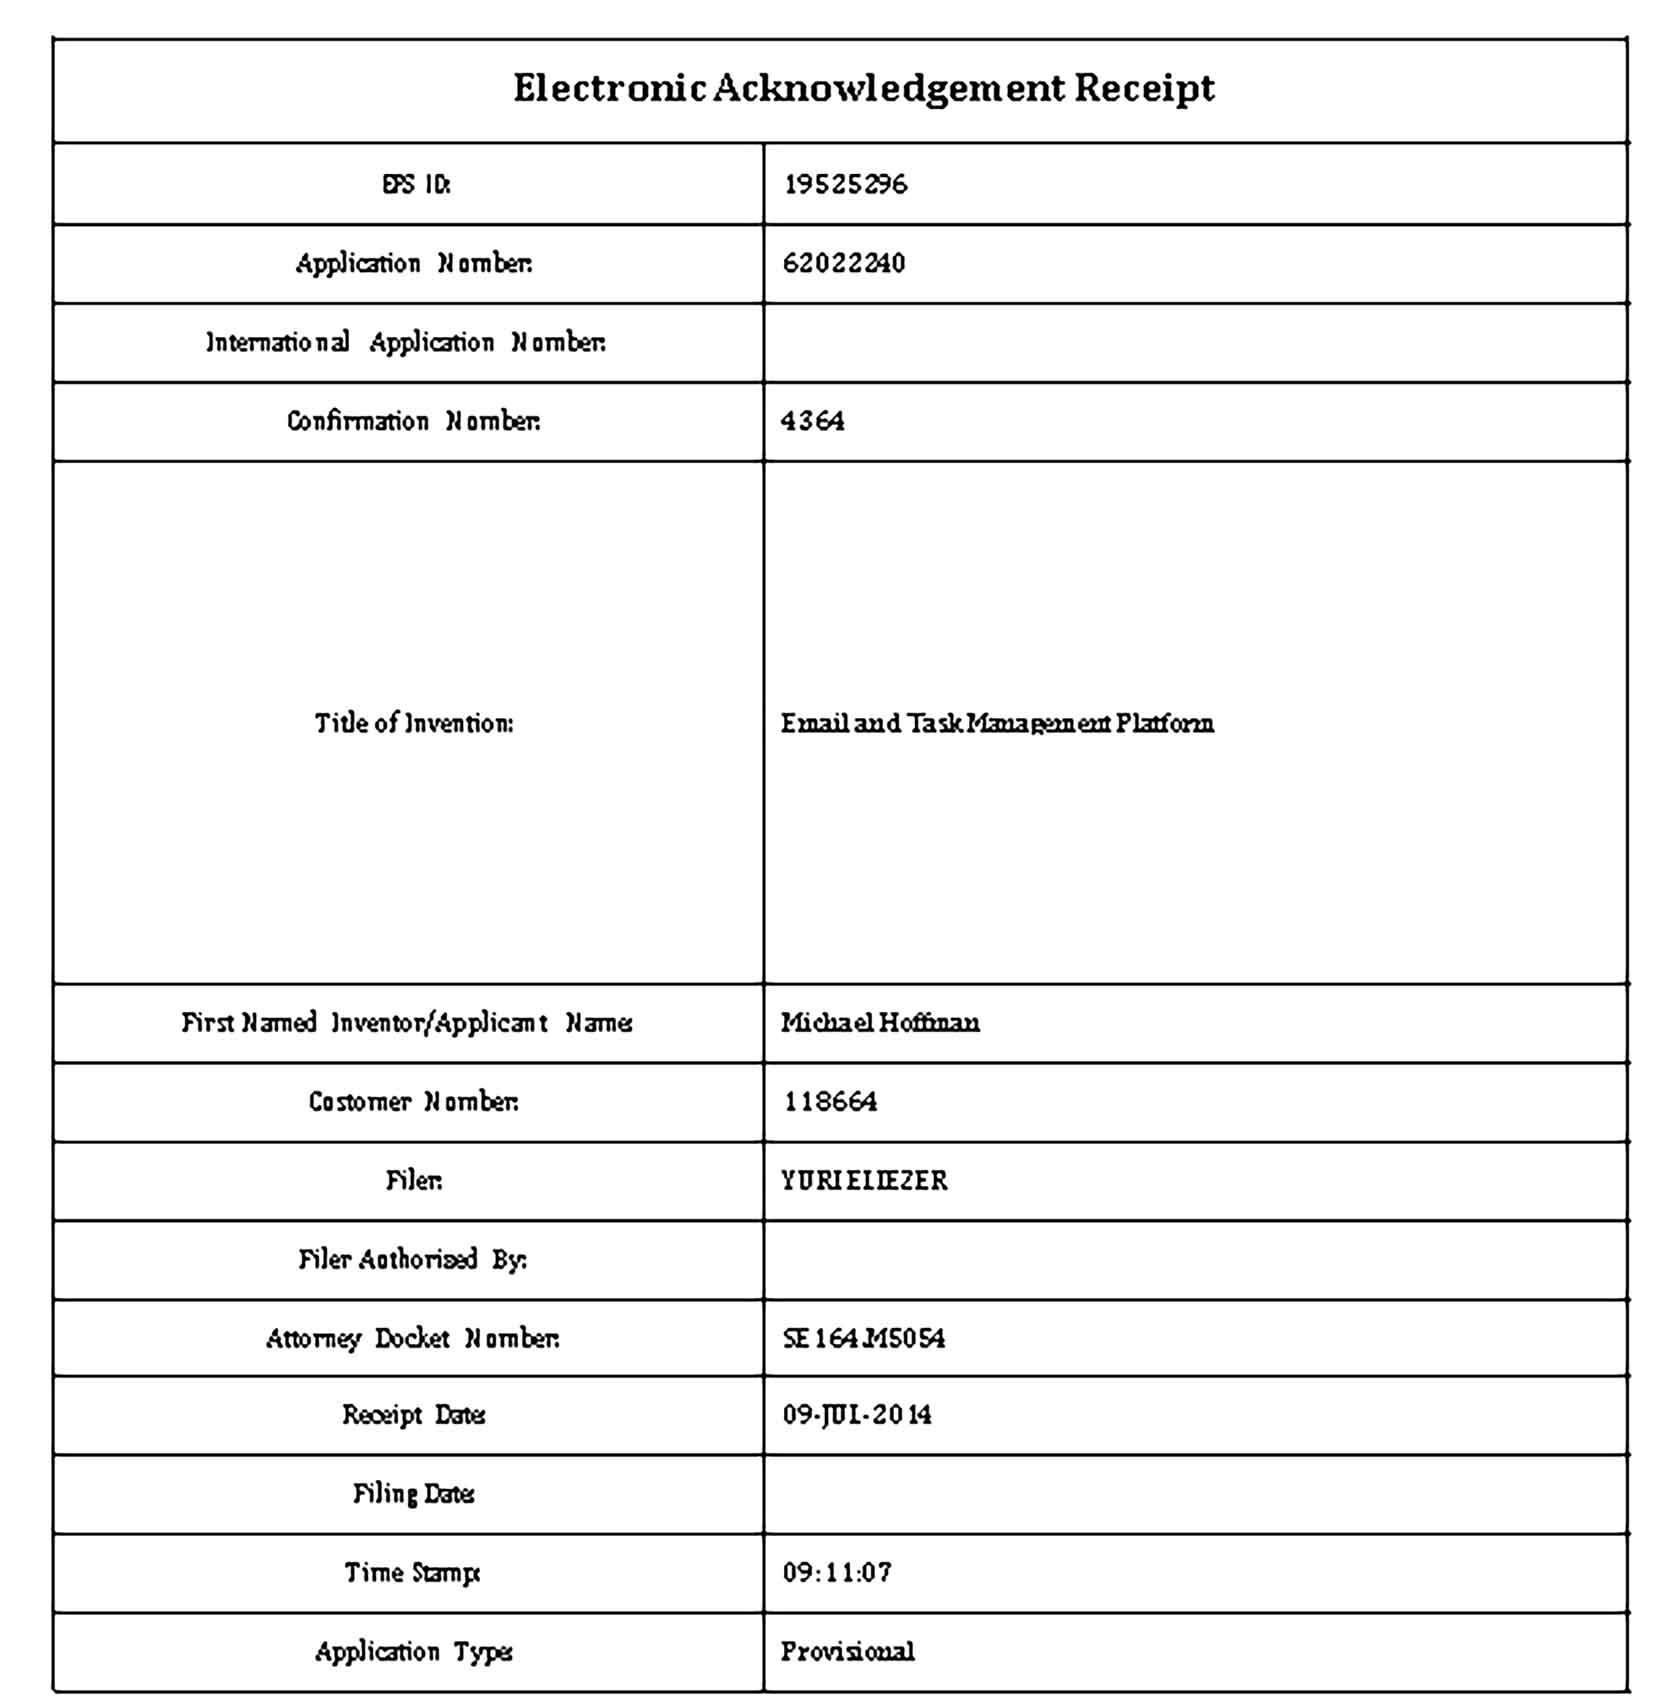 Sample Electronic Payment Acknowledgement Receipt Templates